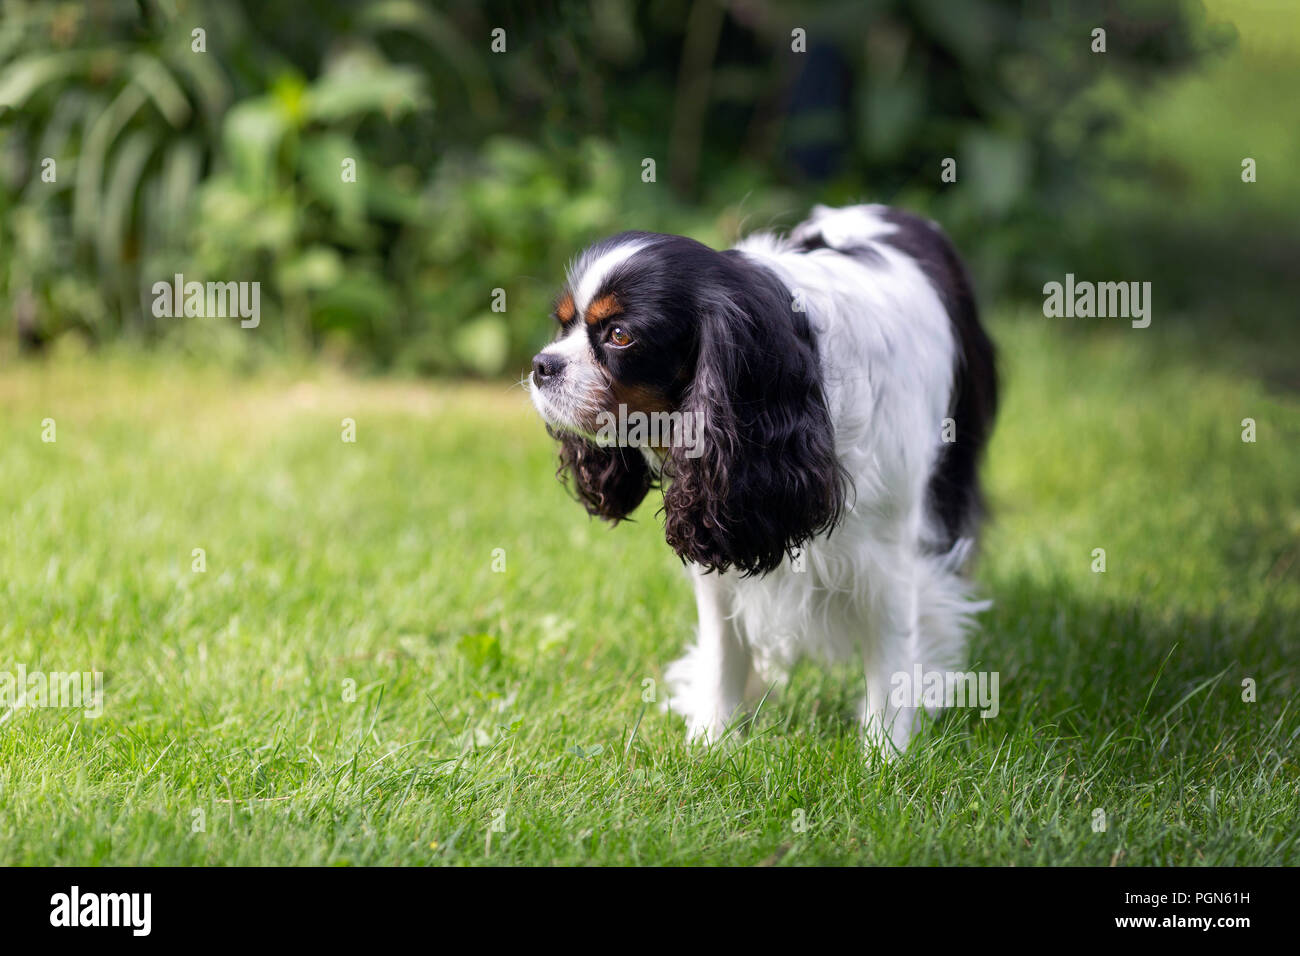 Cute dog standing on the grass in the garden Stock Photo